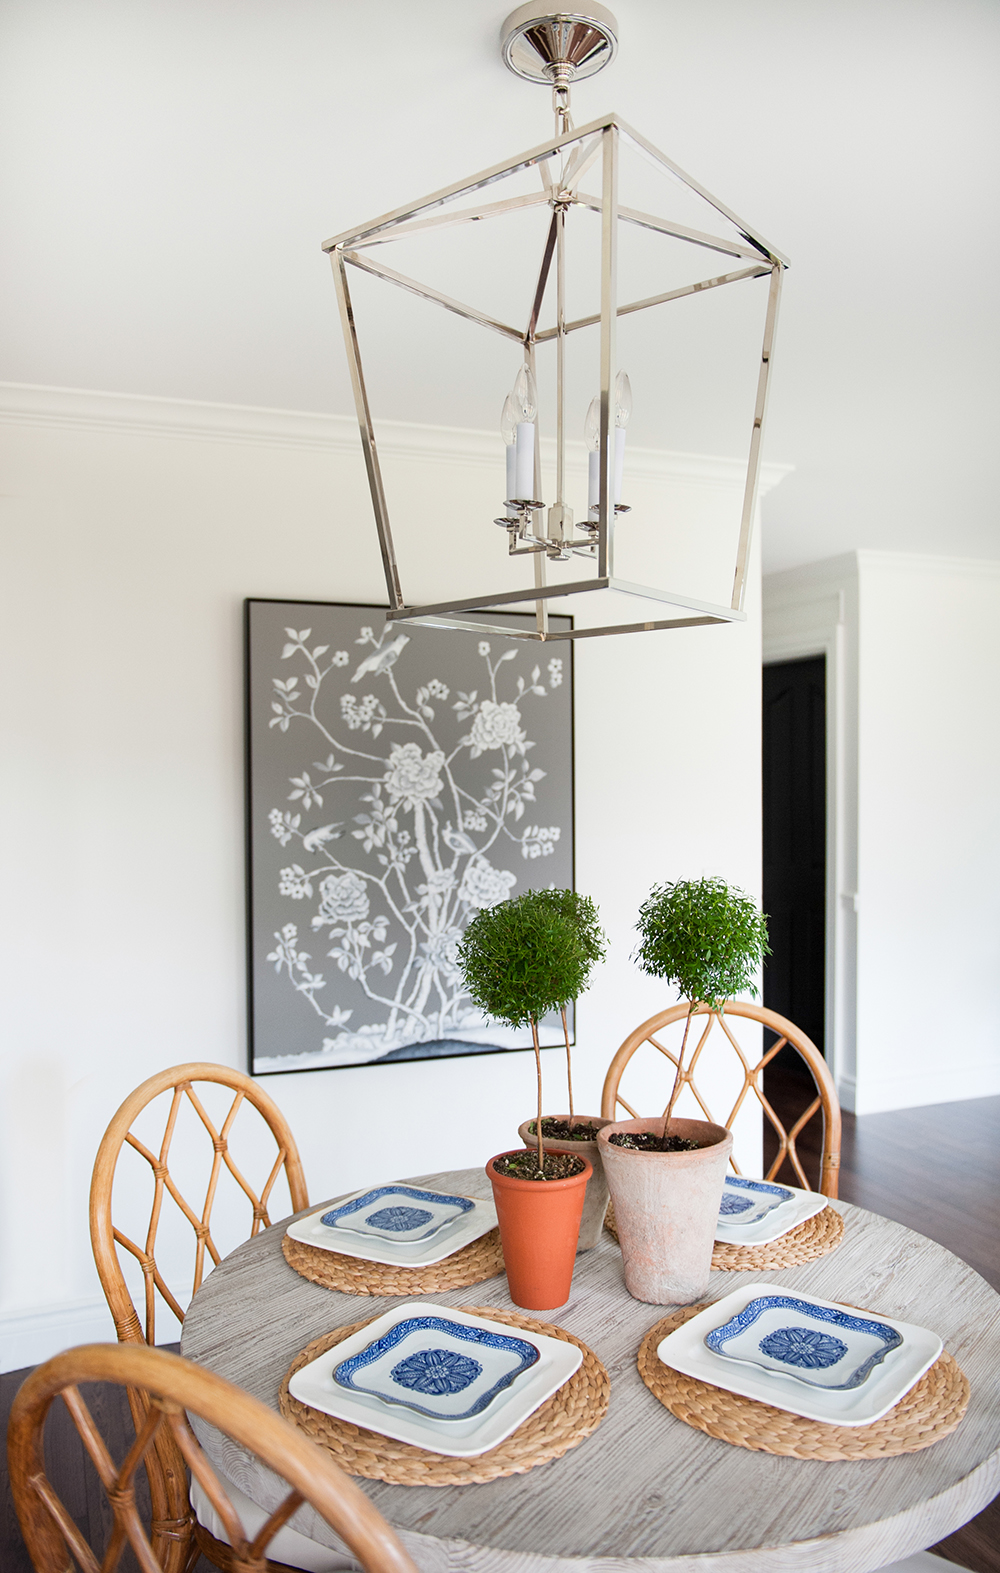 This striking no-glass chandelier also ticks the practical box.